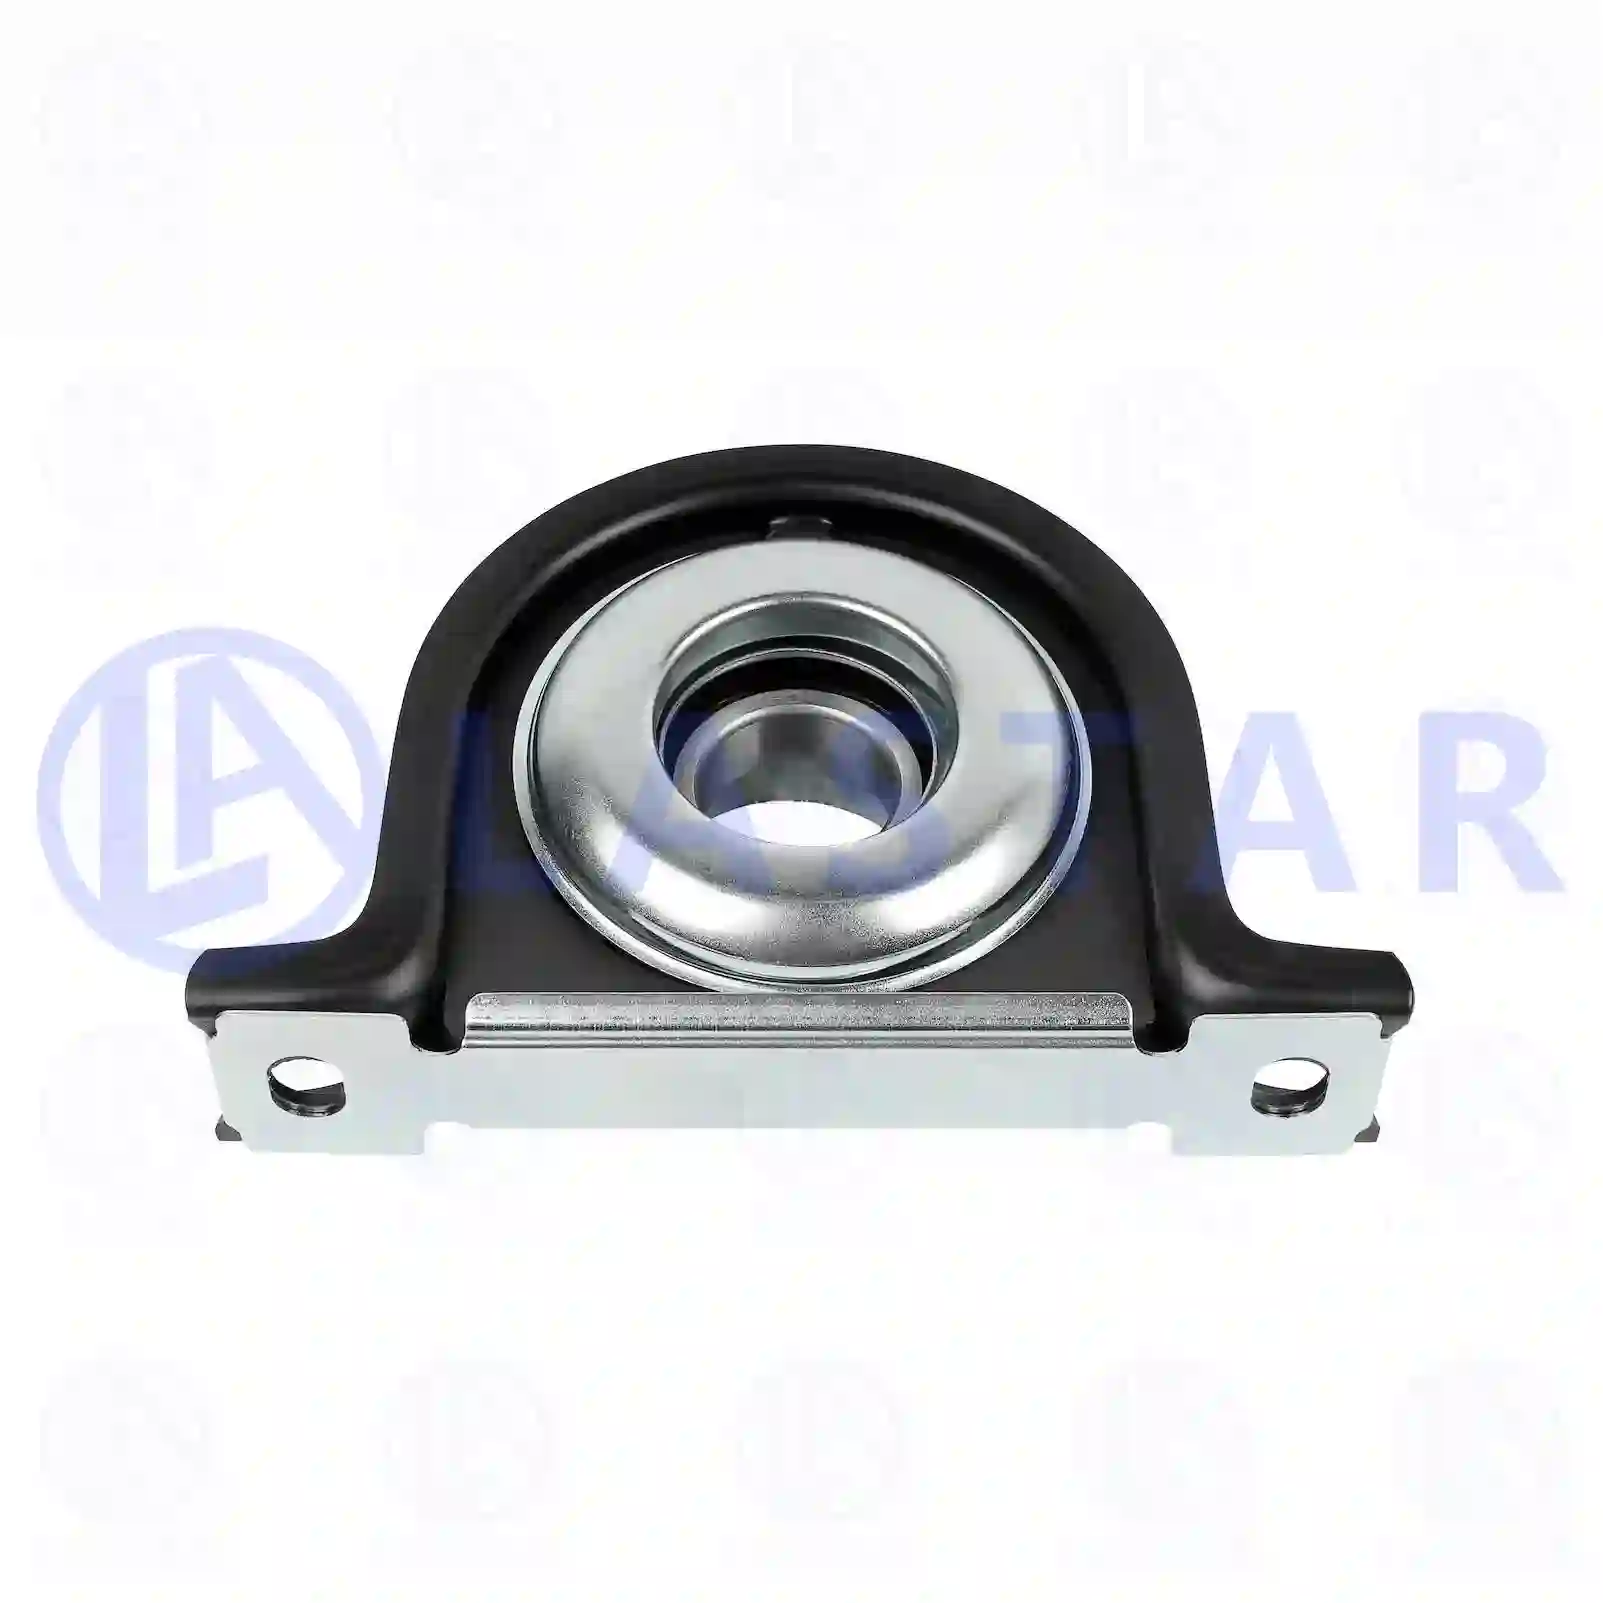 Center bearing, 77734321, 0608924, 608924, 09984261, 09984261, 42541021, 9984261, 5000560295, 7701034294, 7701034902 ||  77734321 Lastar Spare Part | Truck Spare Parts, Auotomotive Spare Parts Center bearing, 77734321, 0608924, 608924, 09984261, 09984261, 42541021, 9984261, 5000560295, 7701034294, 7701034902 ||  77734321 Lastar Spare Part | Truck Spare Parts, Auotomotive Spare Parts